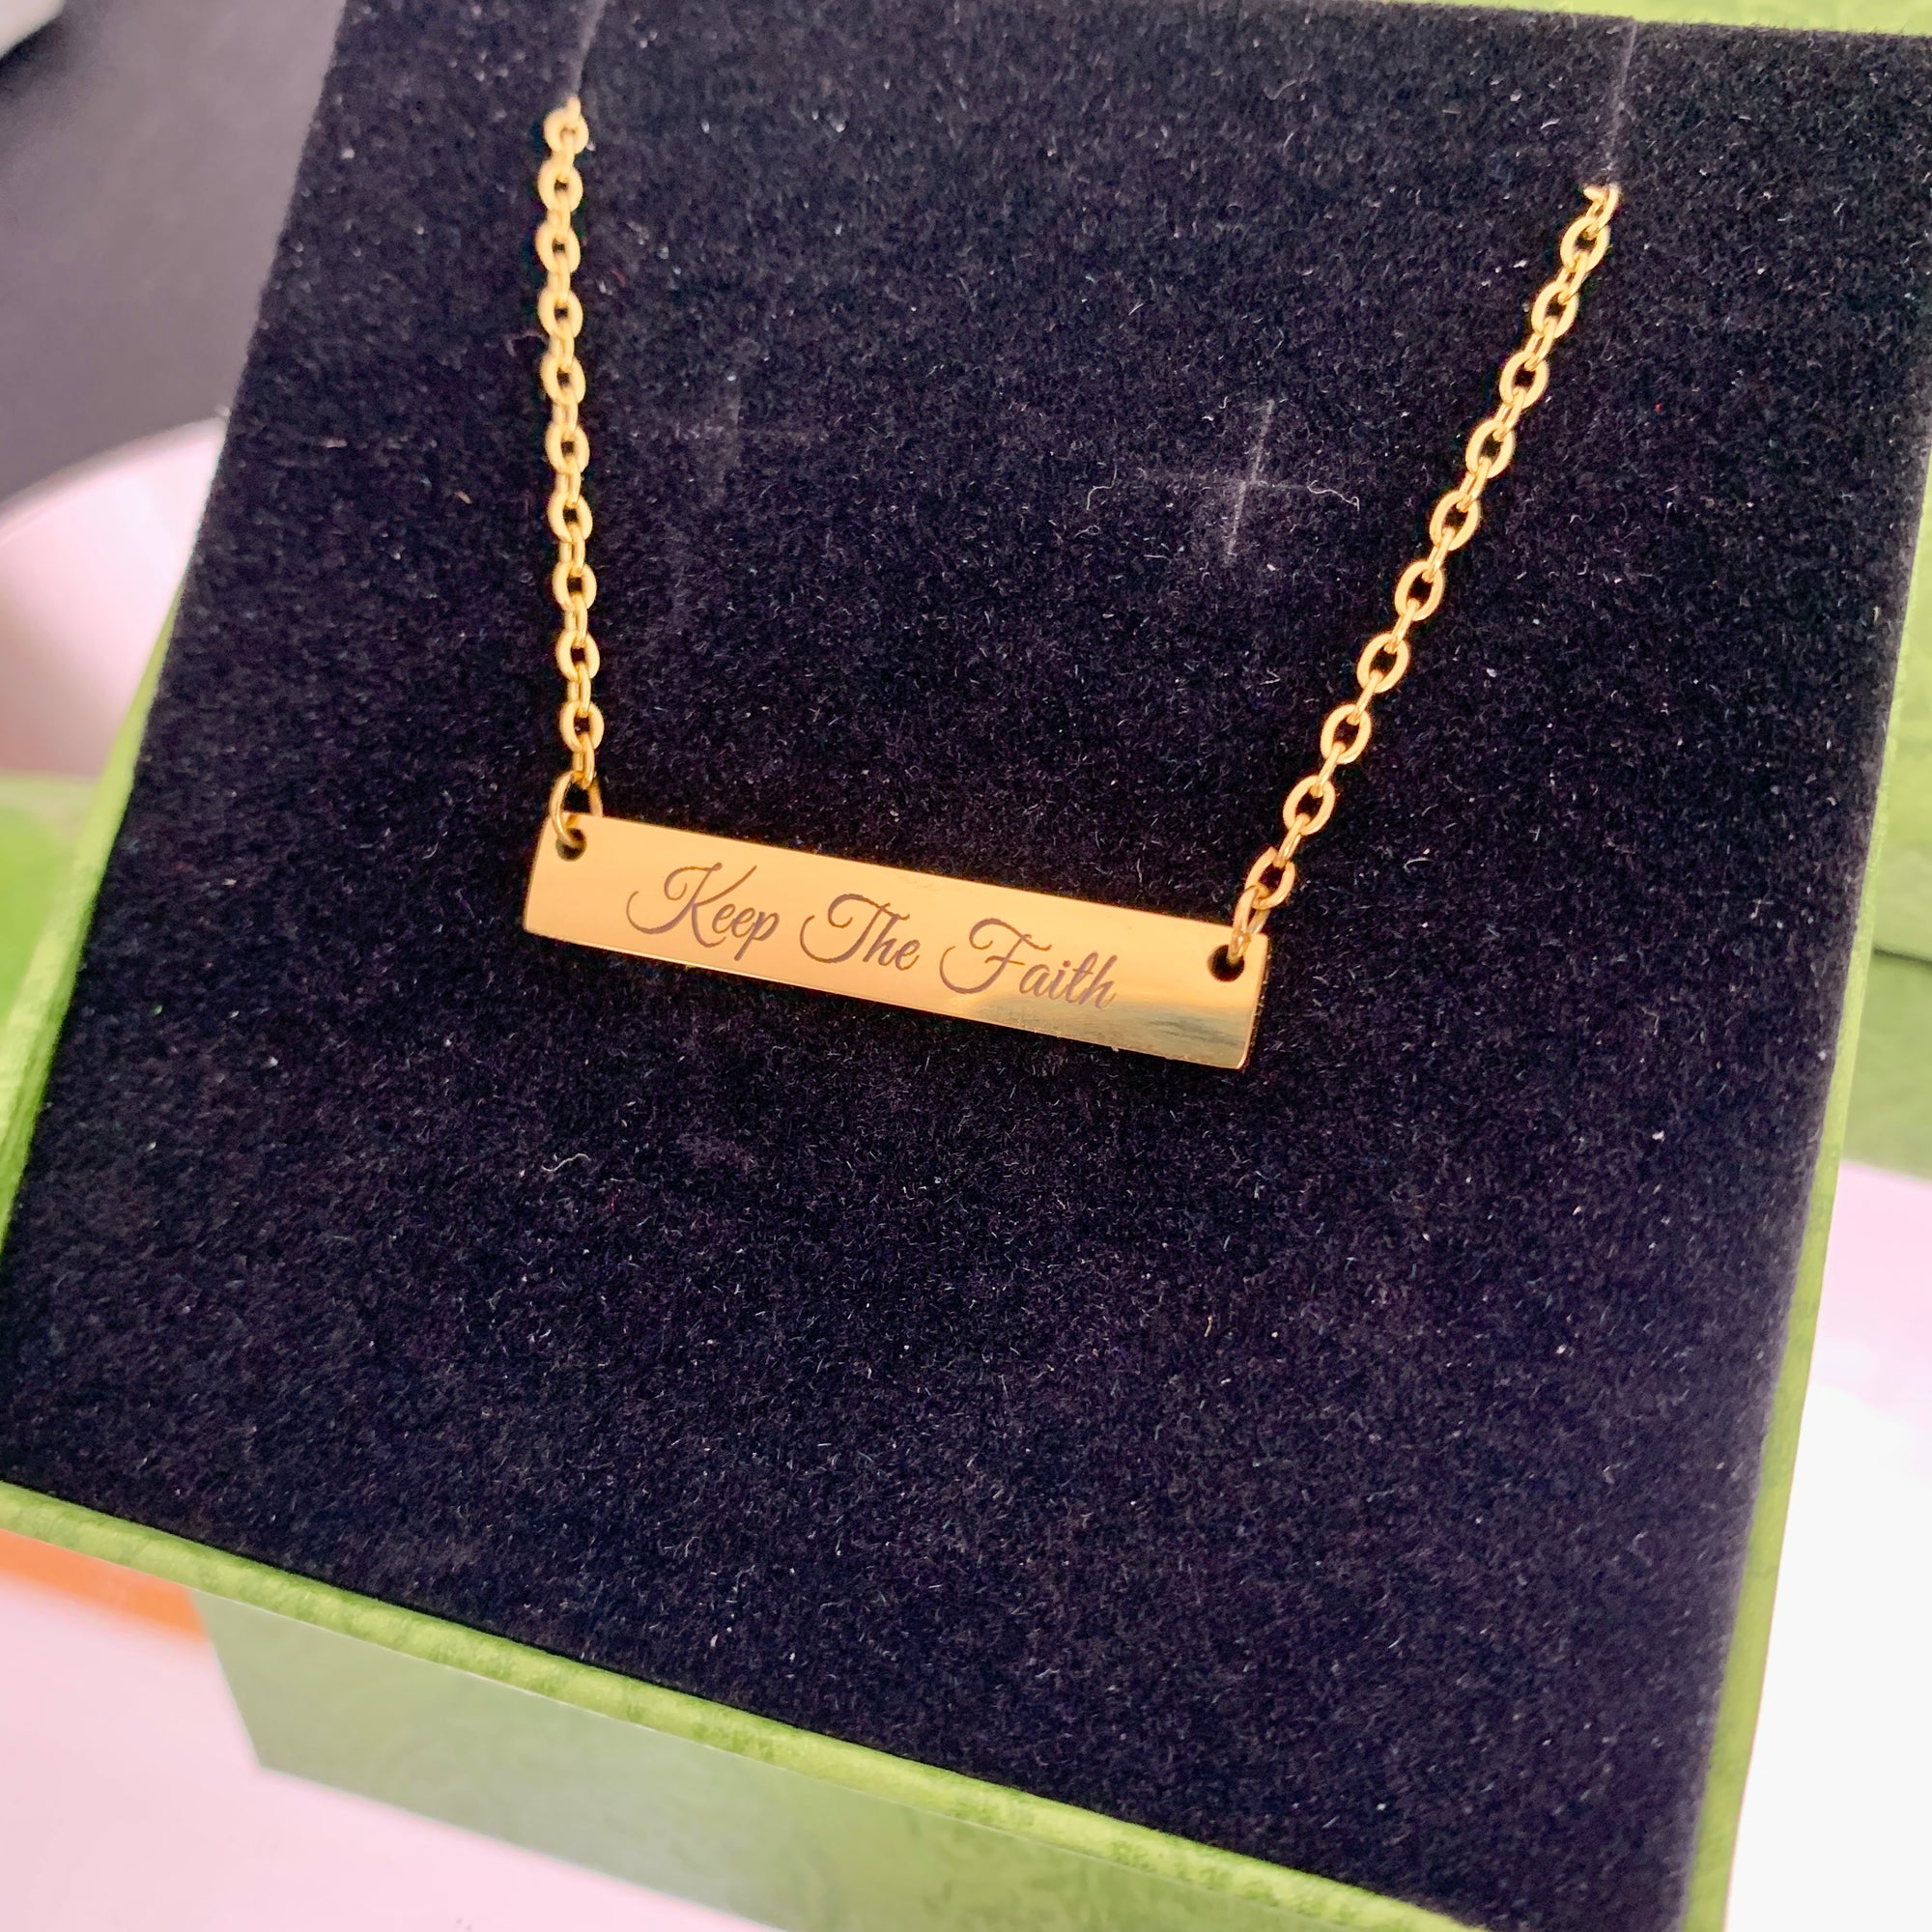 Keep The Faith Bar Necklace: The Perfect Meaningful Gift for Every Occasion